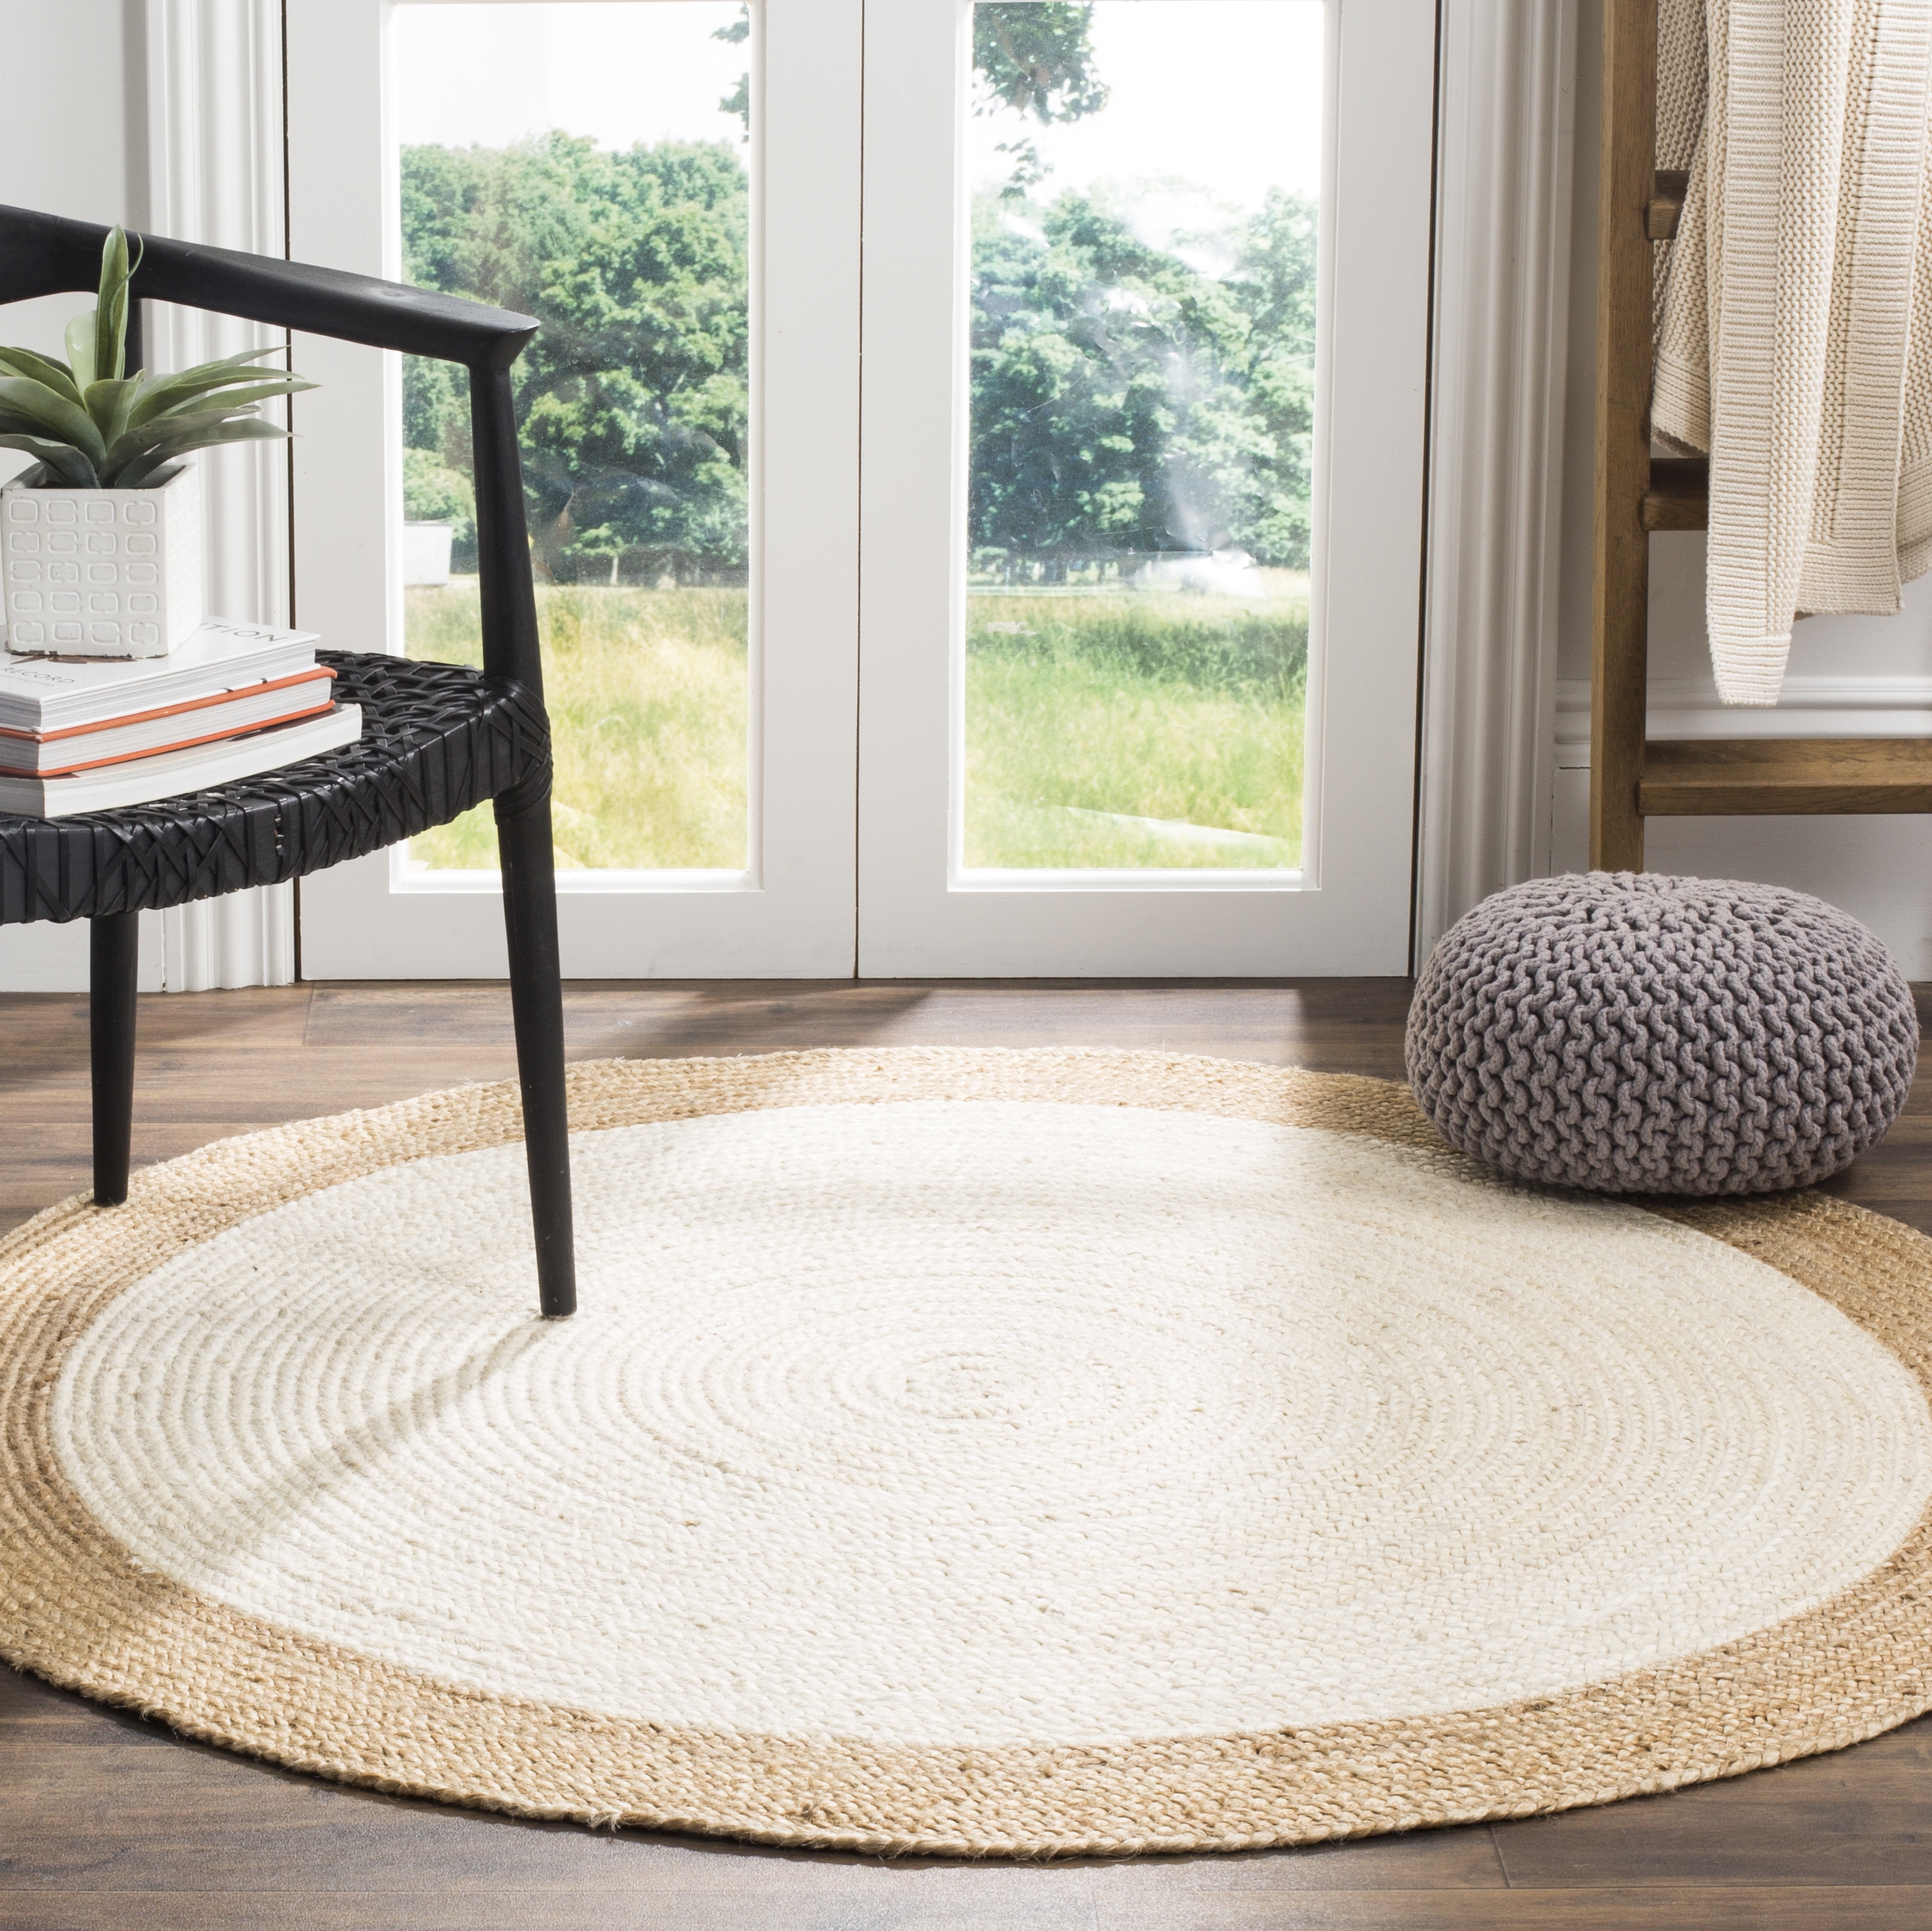 Arlo Home Hand Woven Area Rug, NF801M, Ivory/Natural,  4' X 4' Round - Image 1